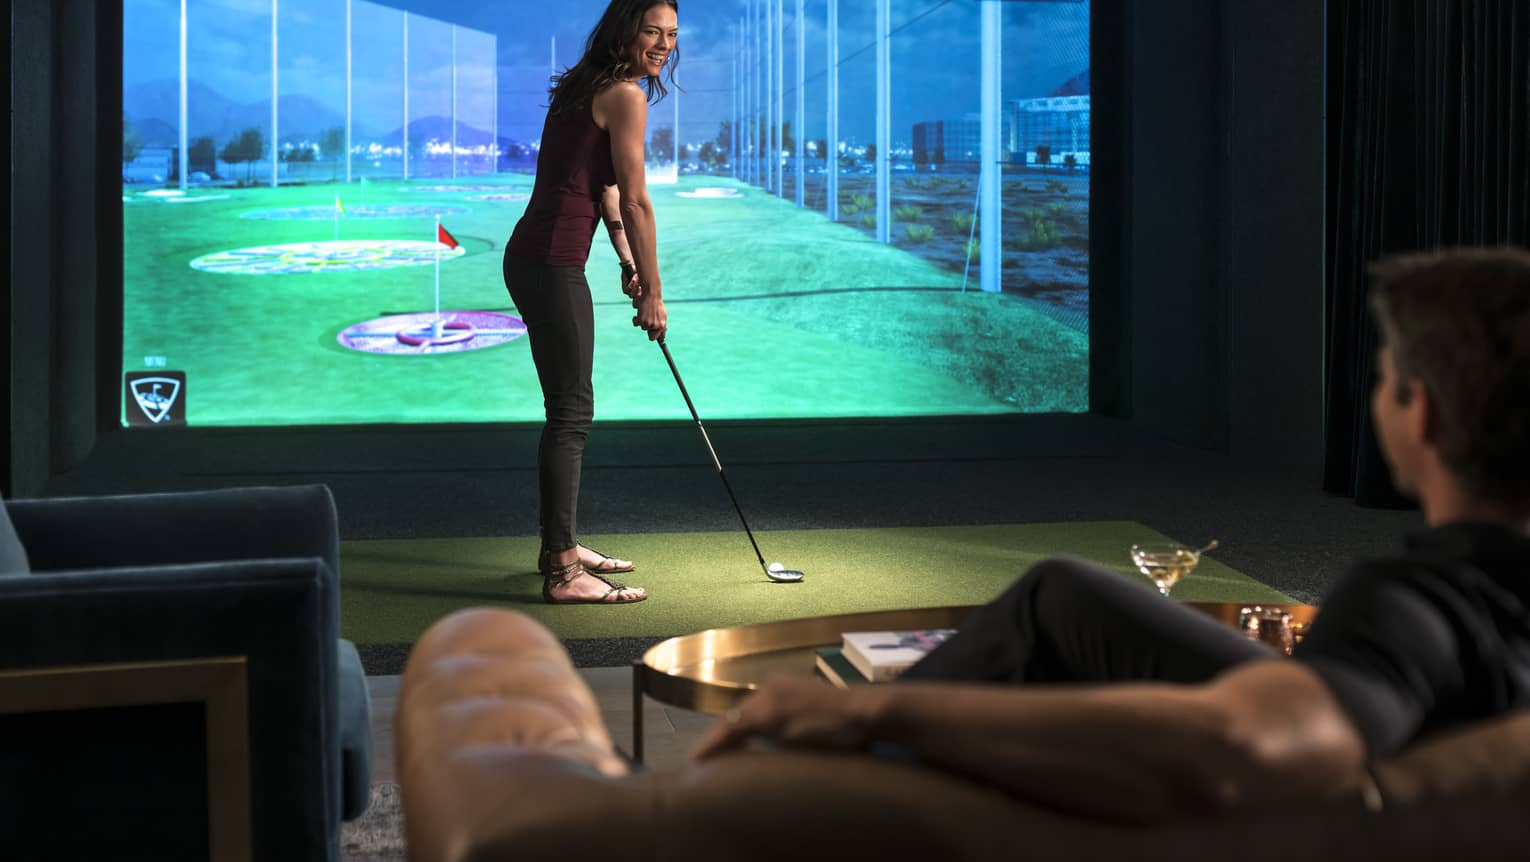 A woman prepares to swing a golf club in front of a virtual golf simulator screen